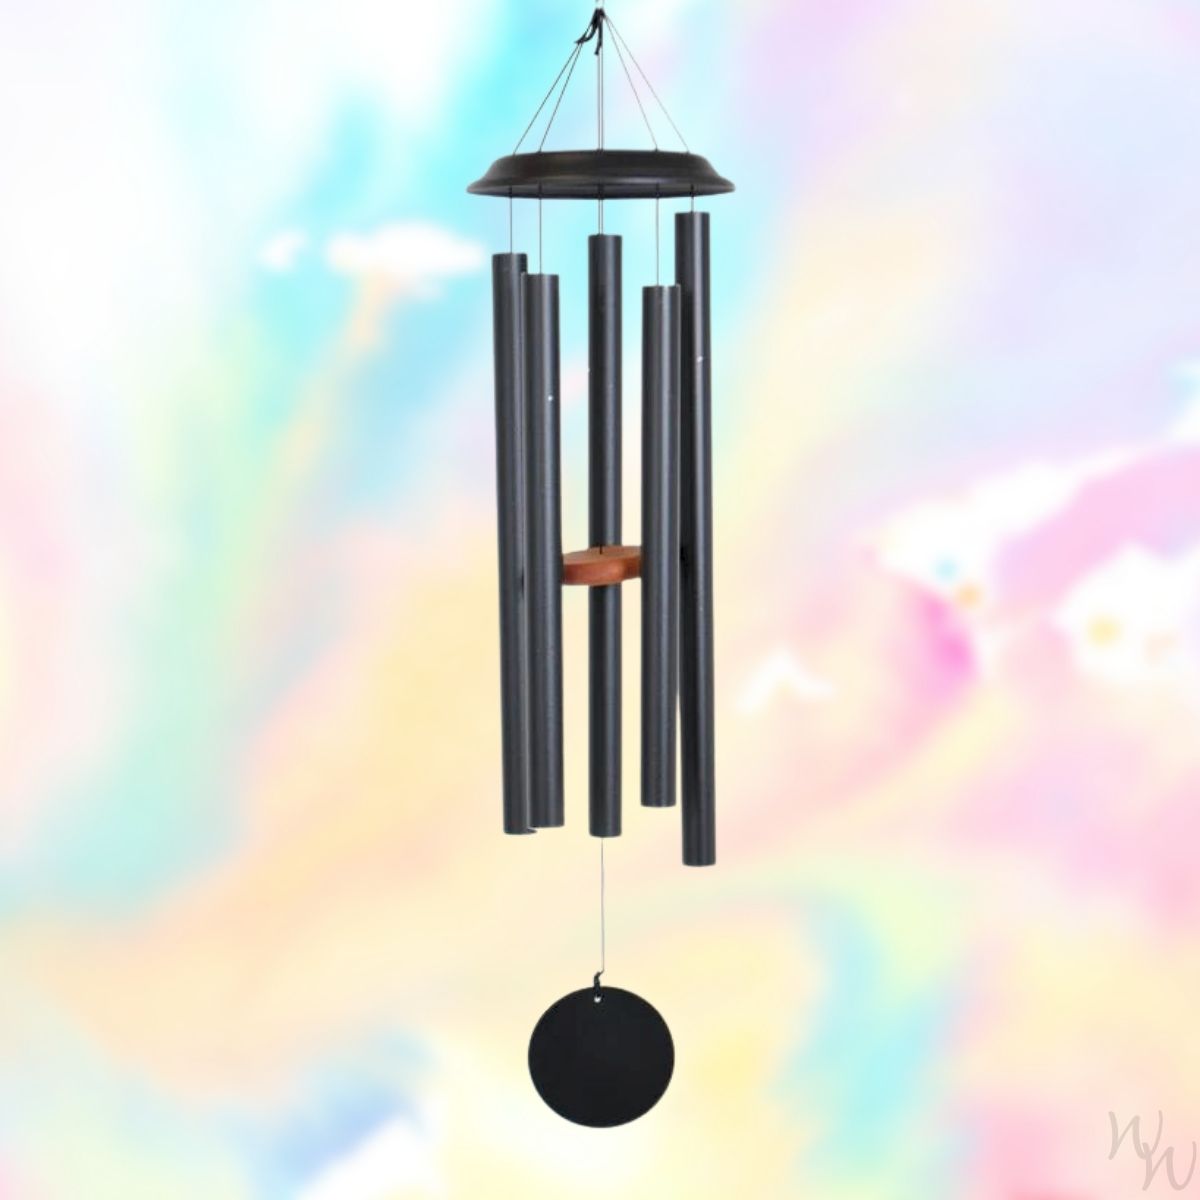 Shenandoah Melodies 47 Inch Black Wind Chime - Scale Of B